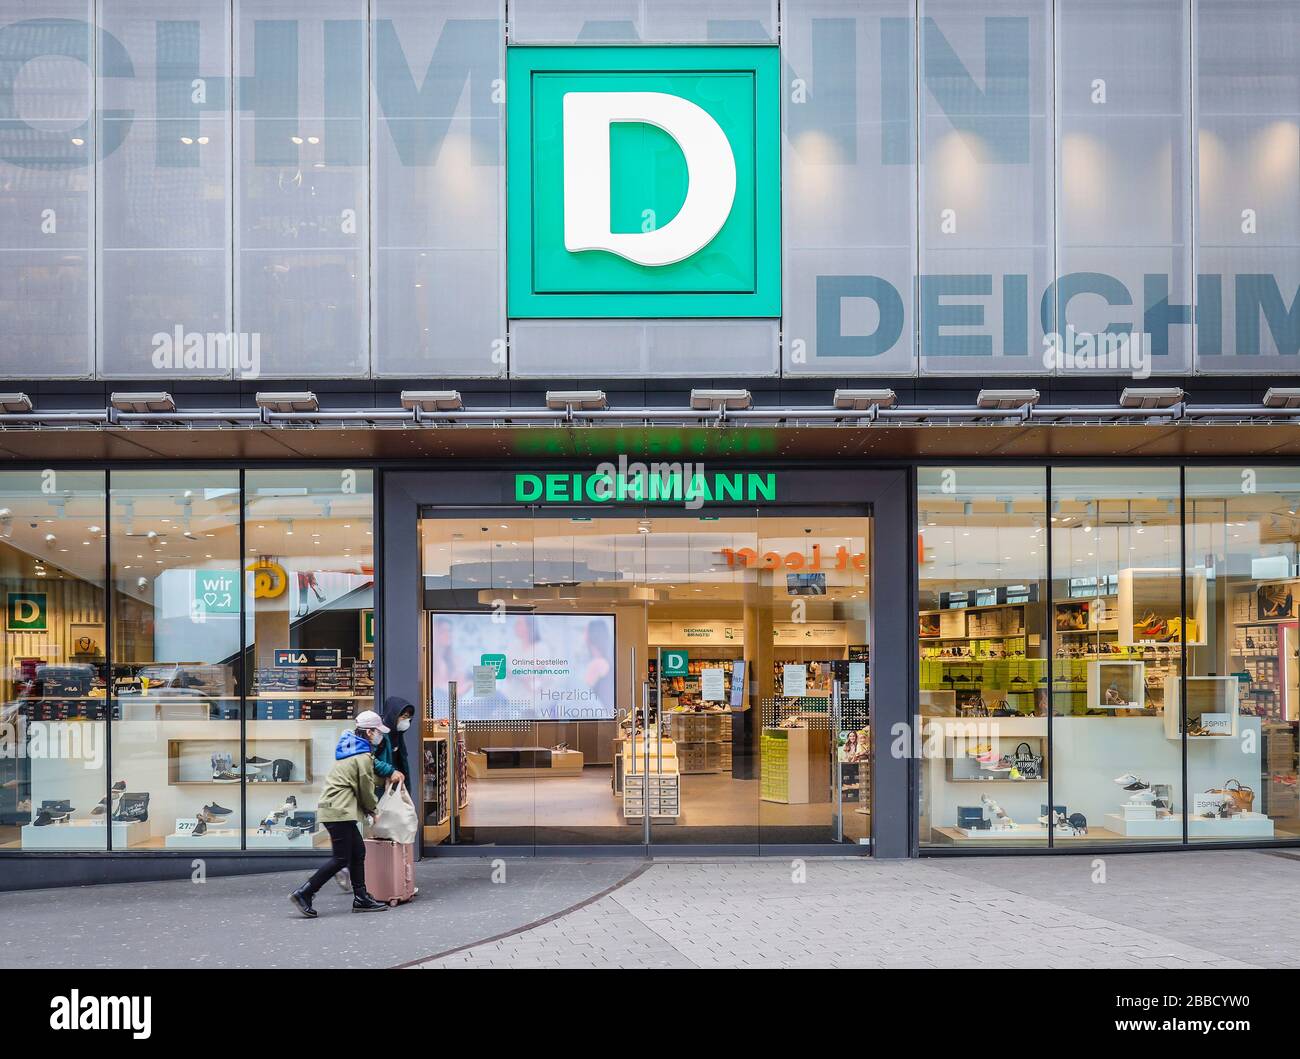 Deichmann Shoe Shop High Stock Photography and Images - Alamy